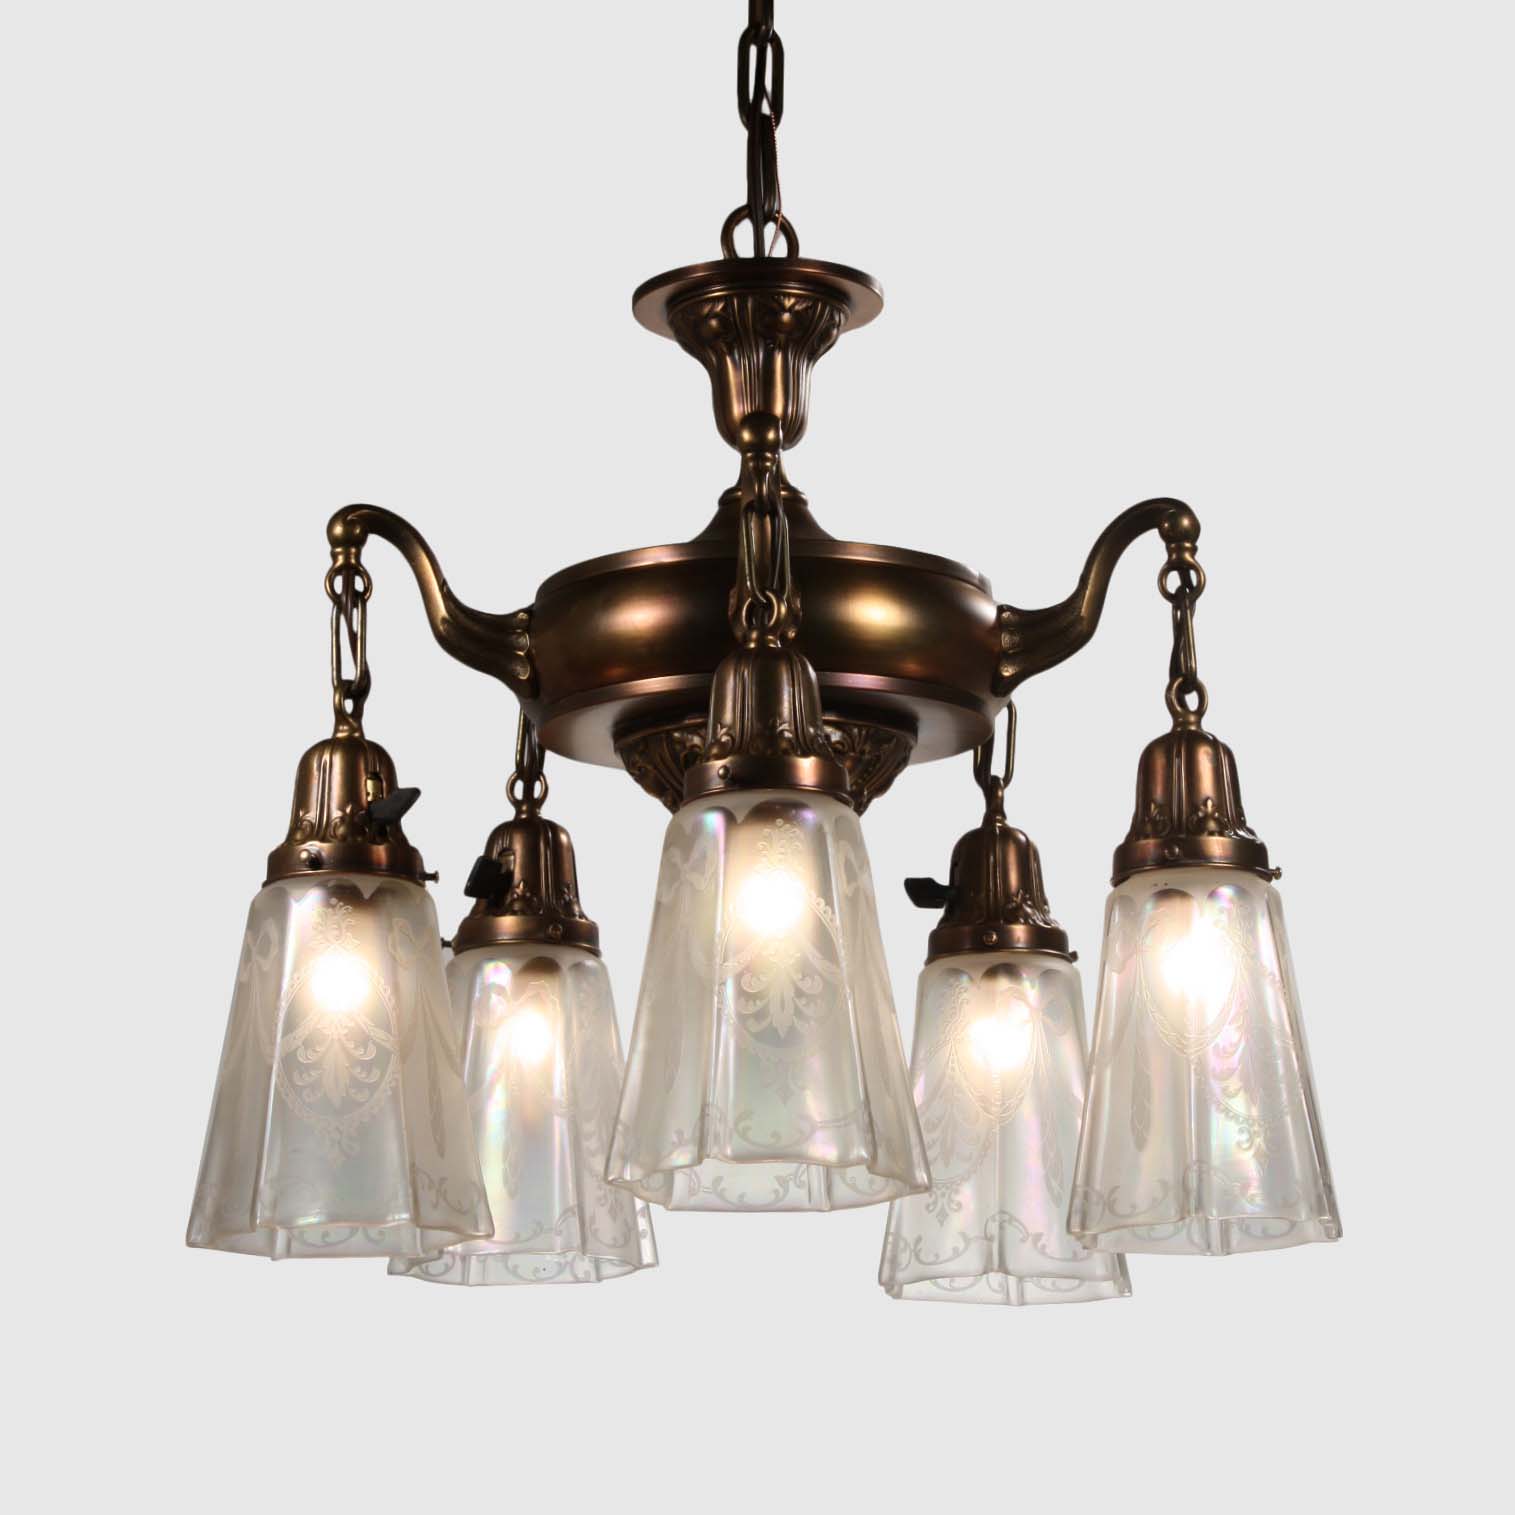 SOLD Antique Neoclassical Chandelier with Original Opalescent Shades-56891